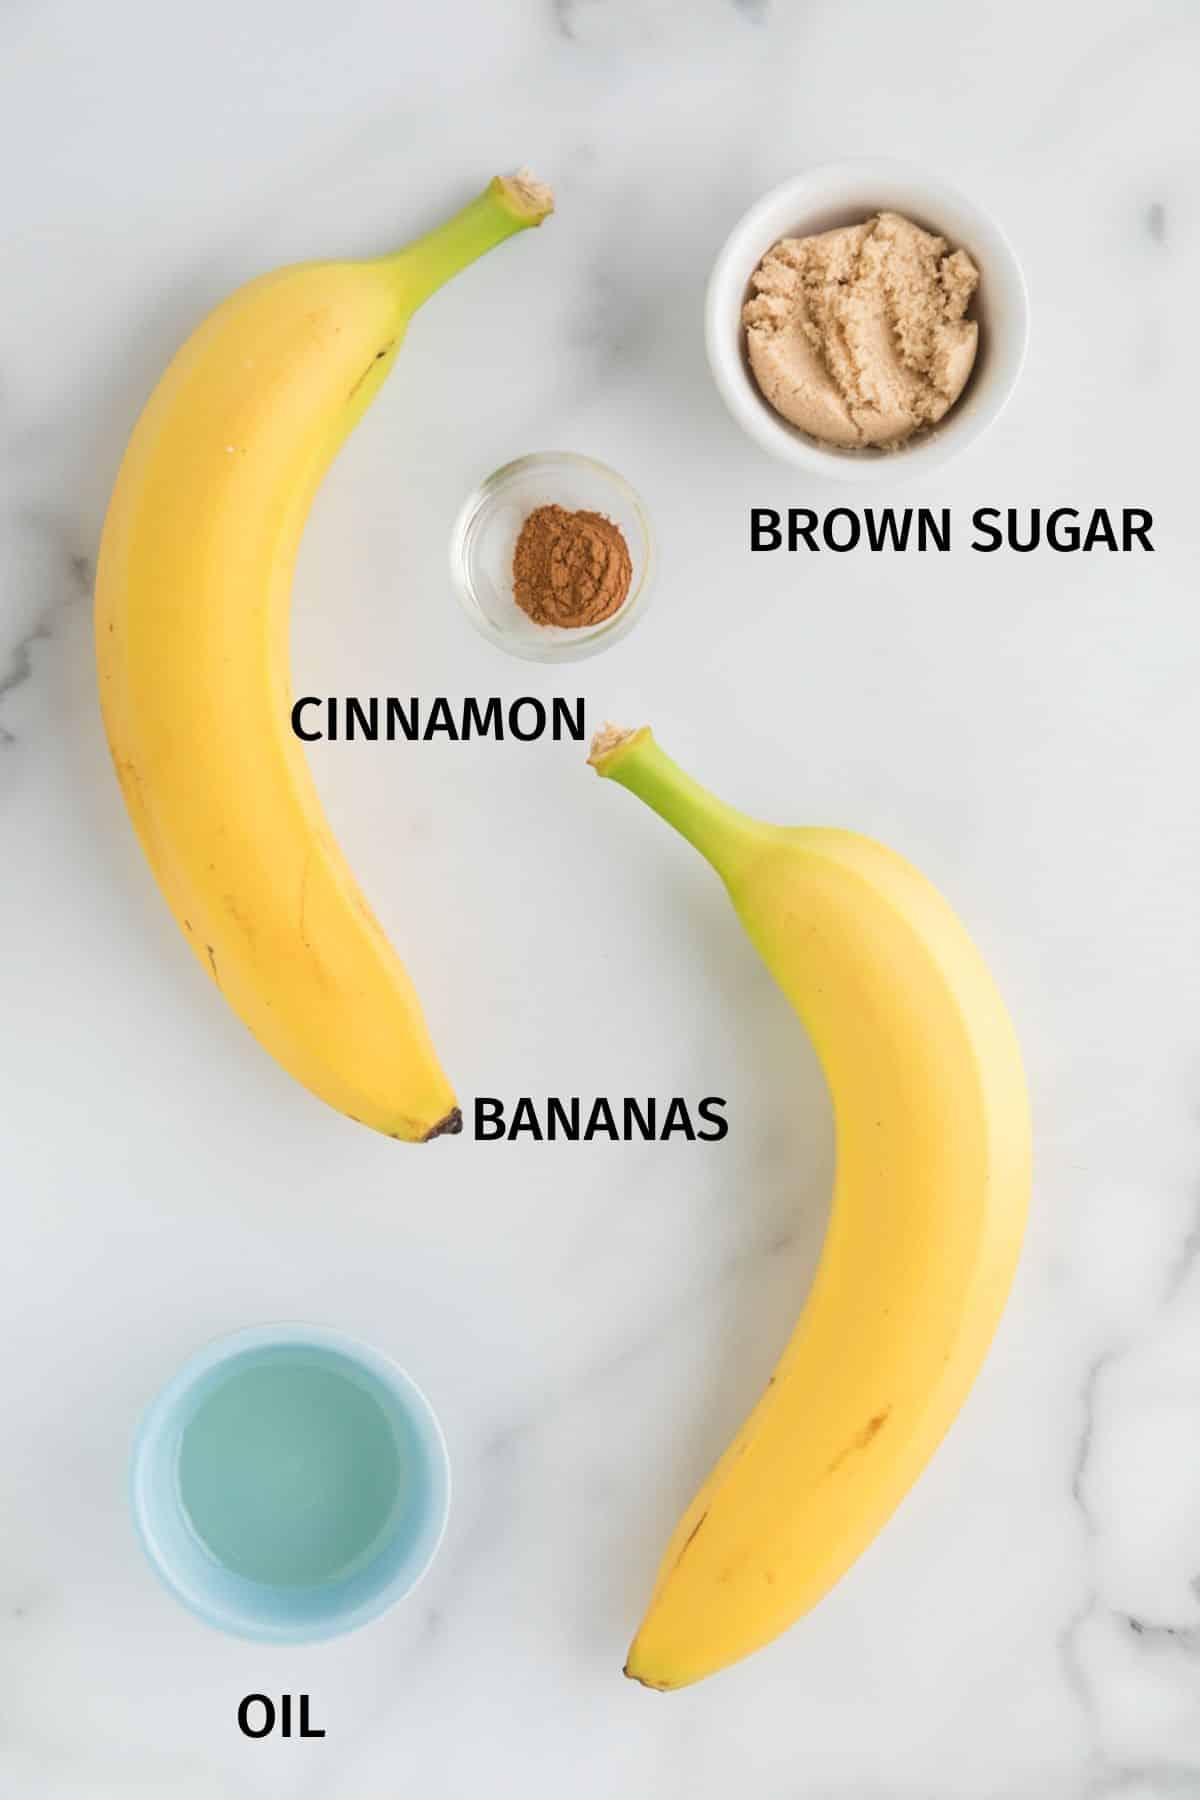 Bananas, brown sugar, cinnamon, and oil in bowls on a white surface.